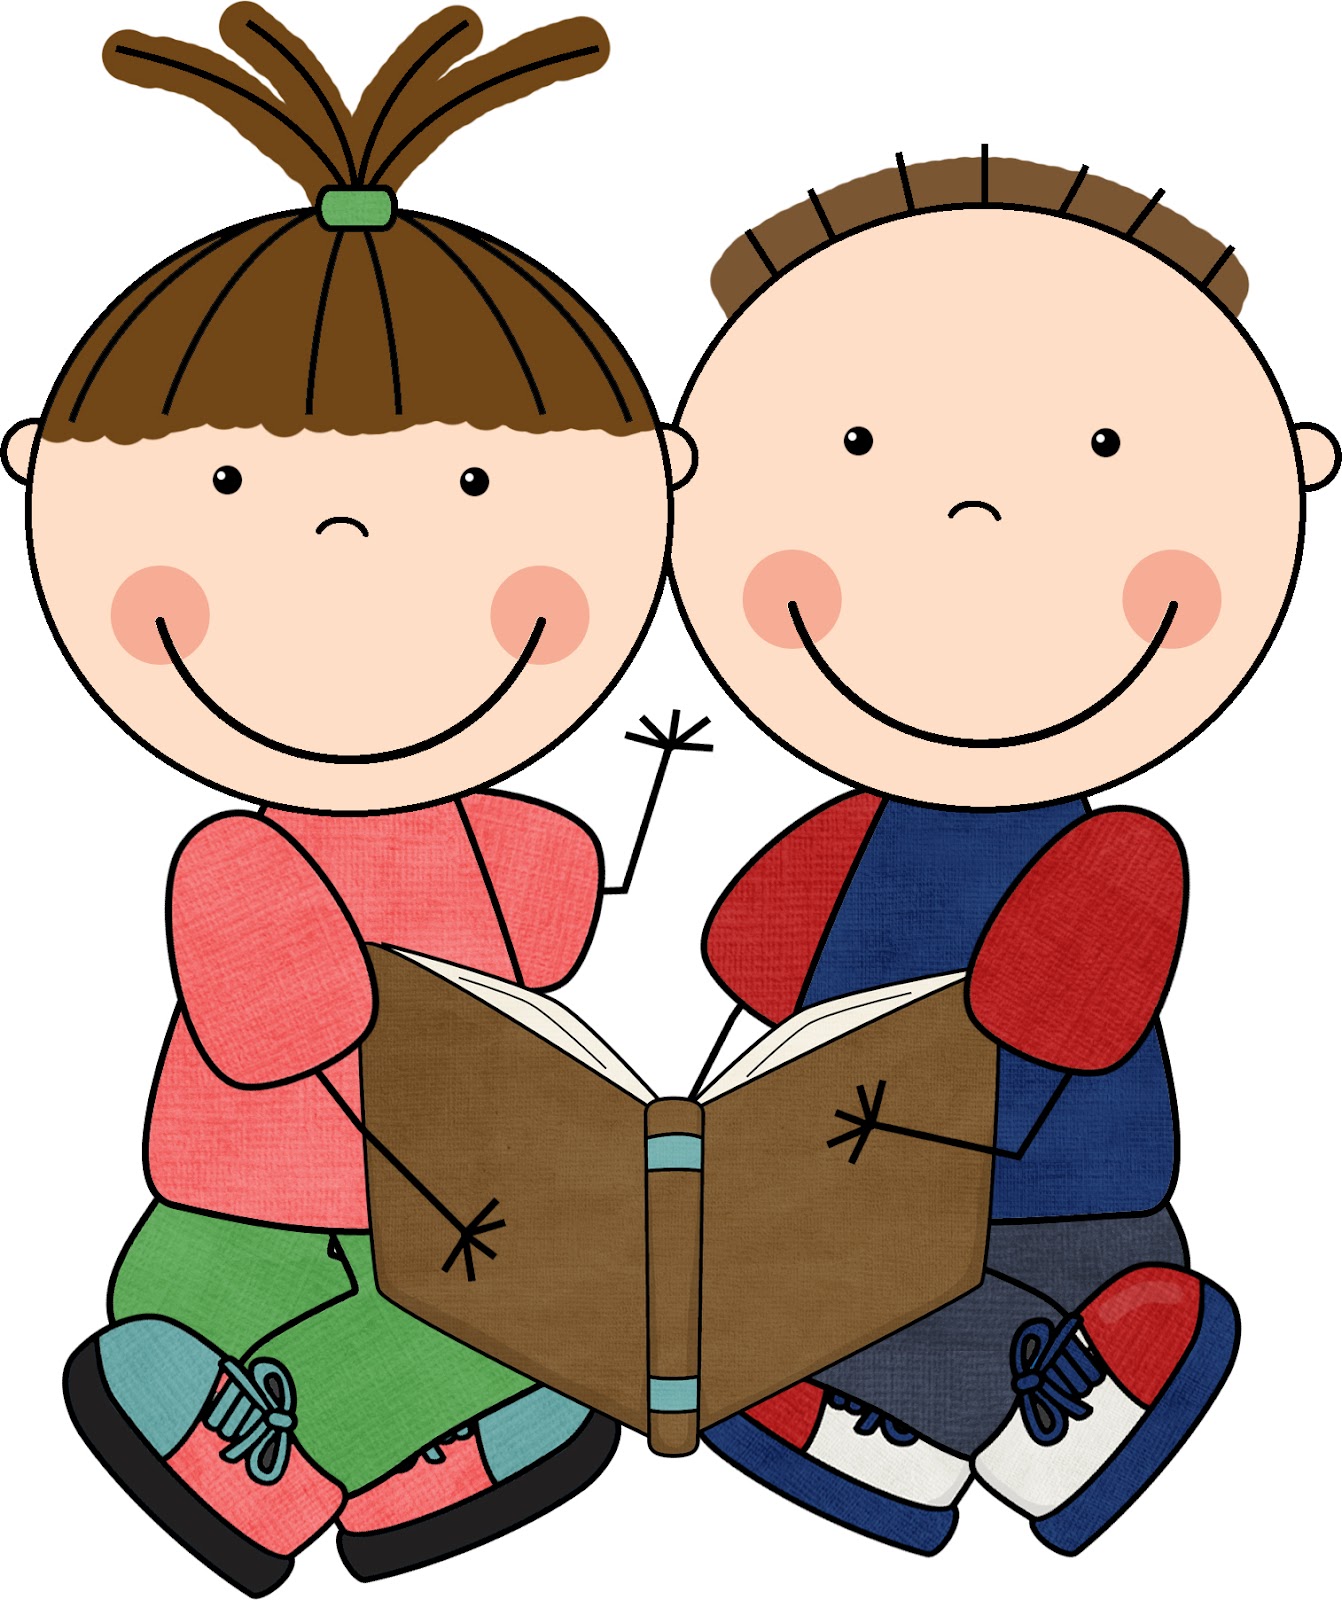 Child Reading Clipart & Child Reading Clip Art Images.